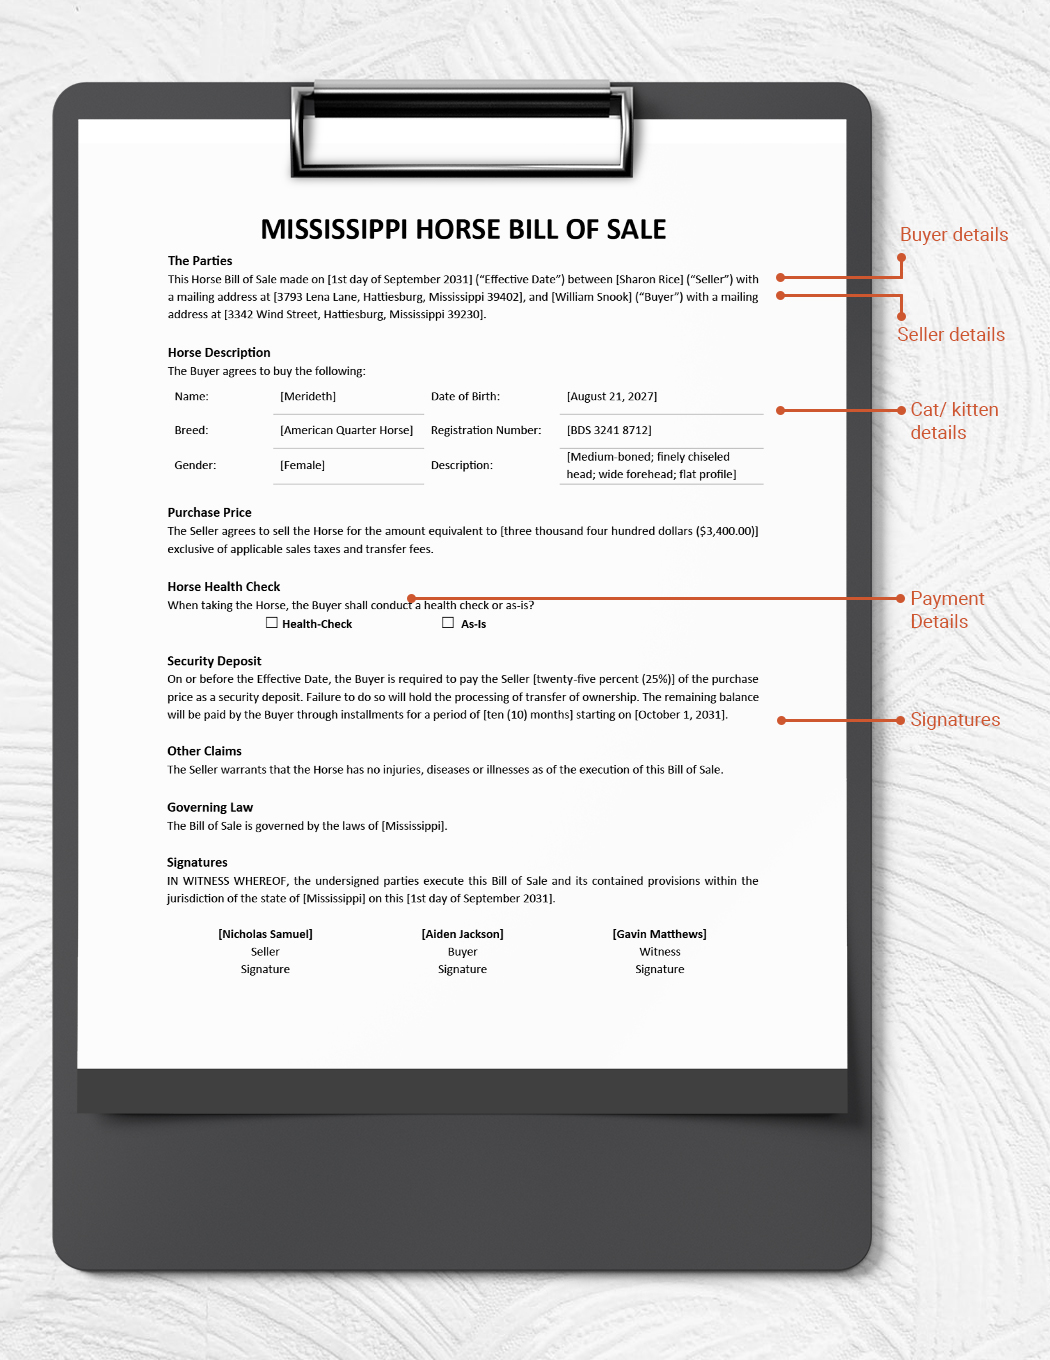 Mississippi Horse Bill of Sale Template